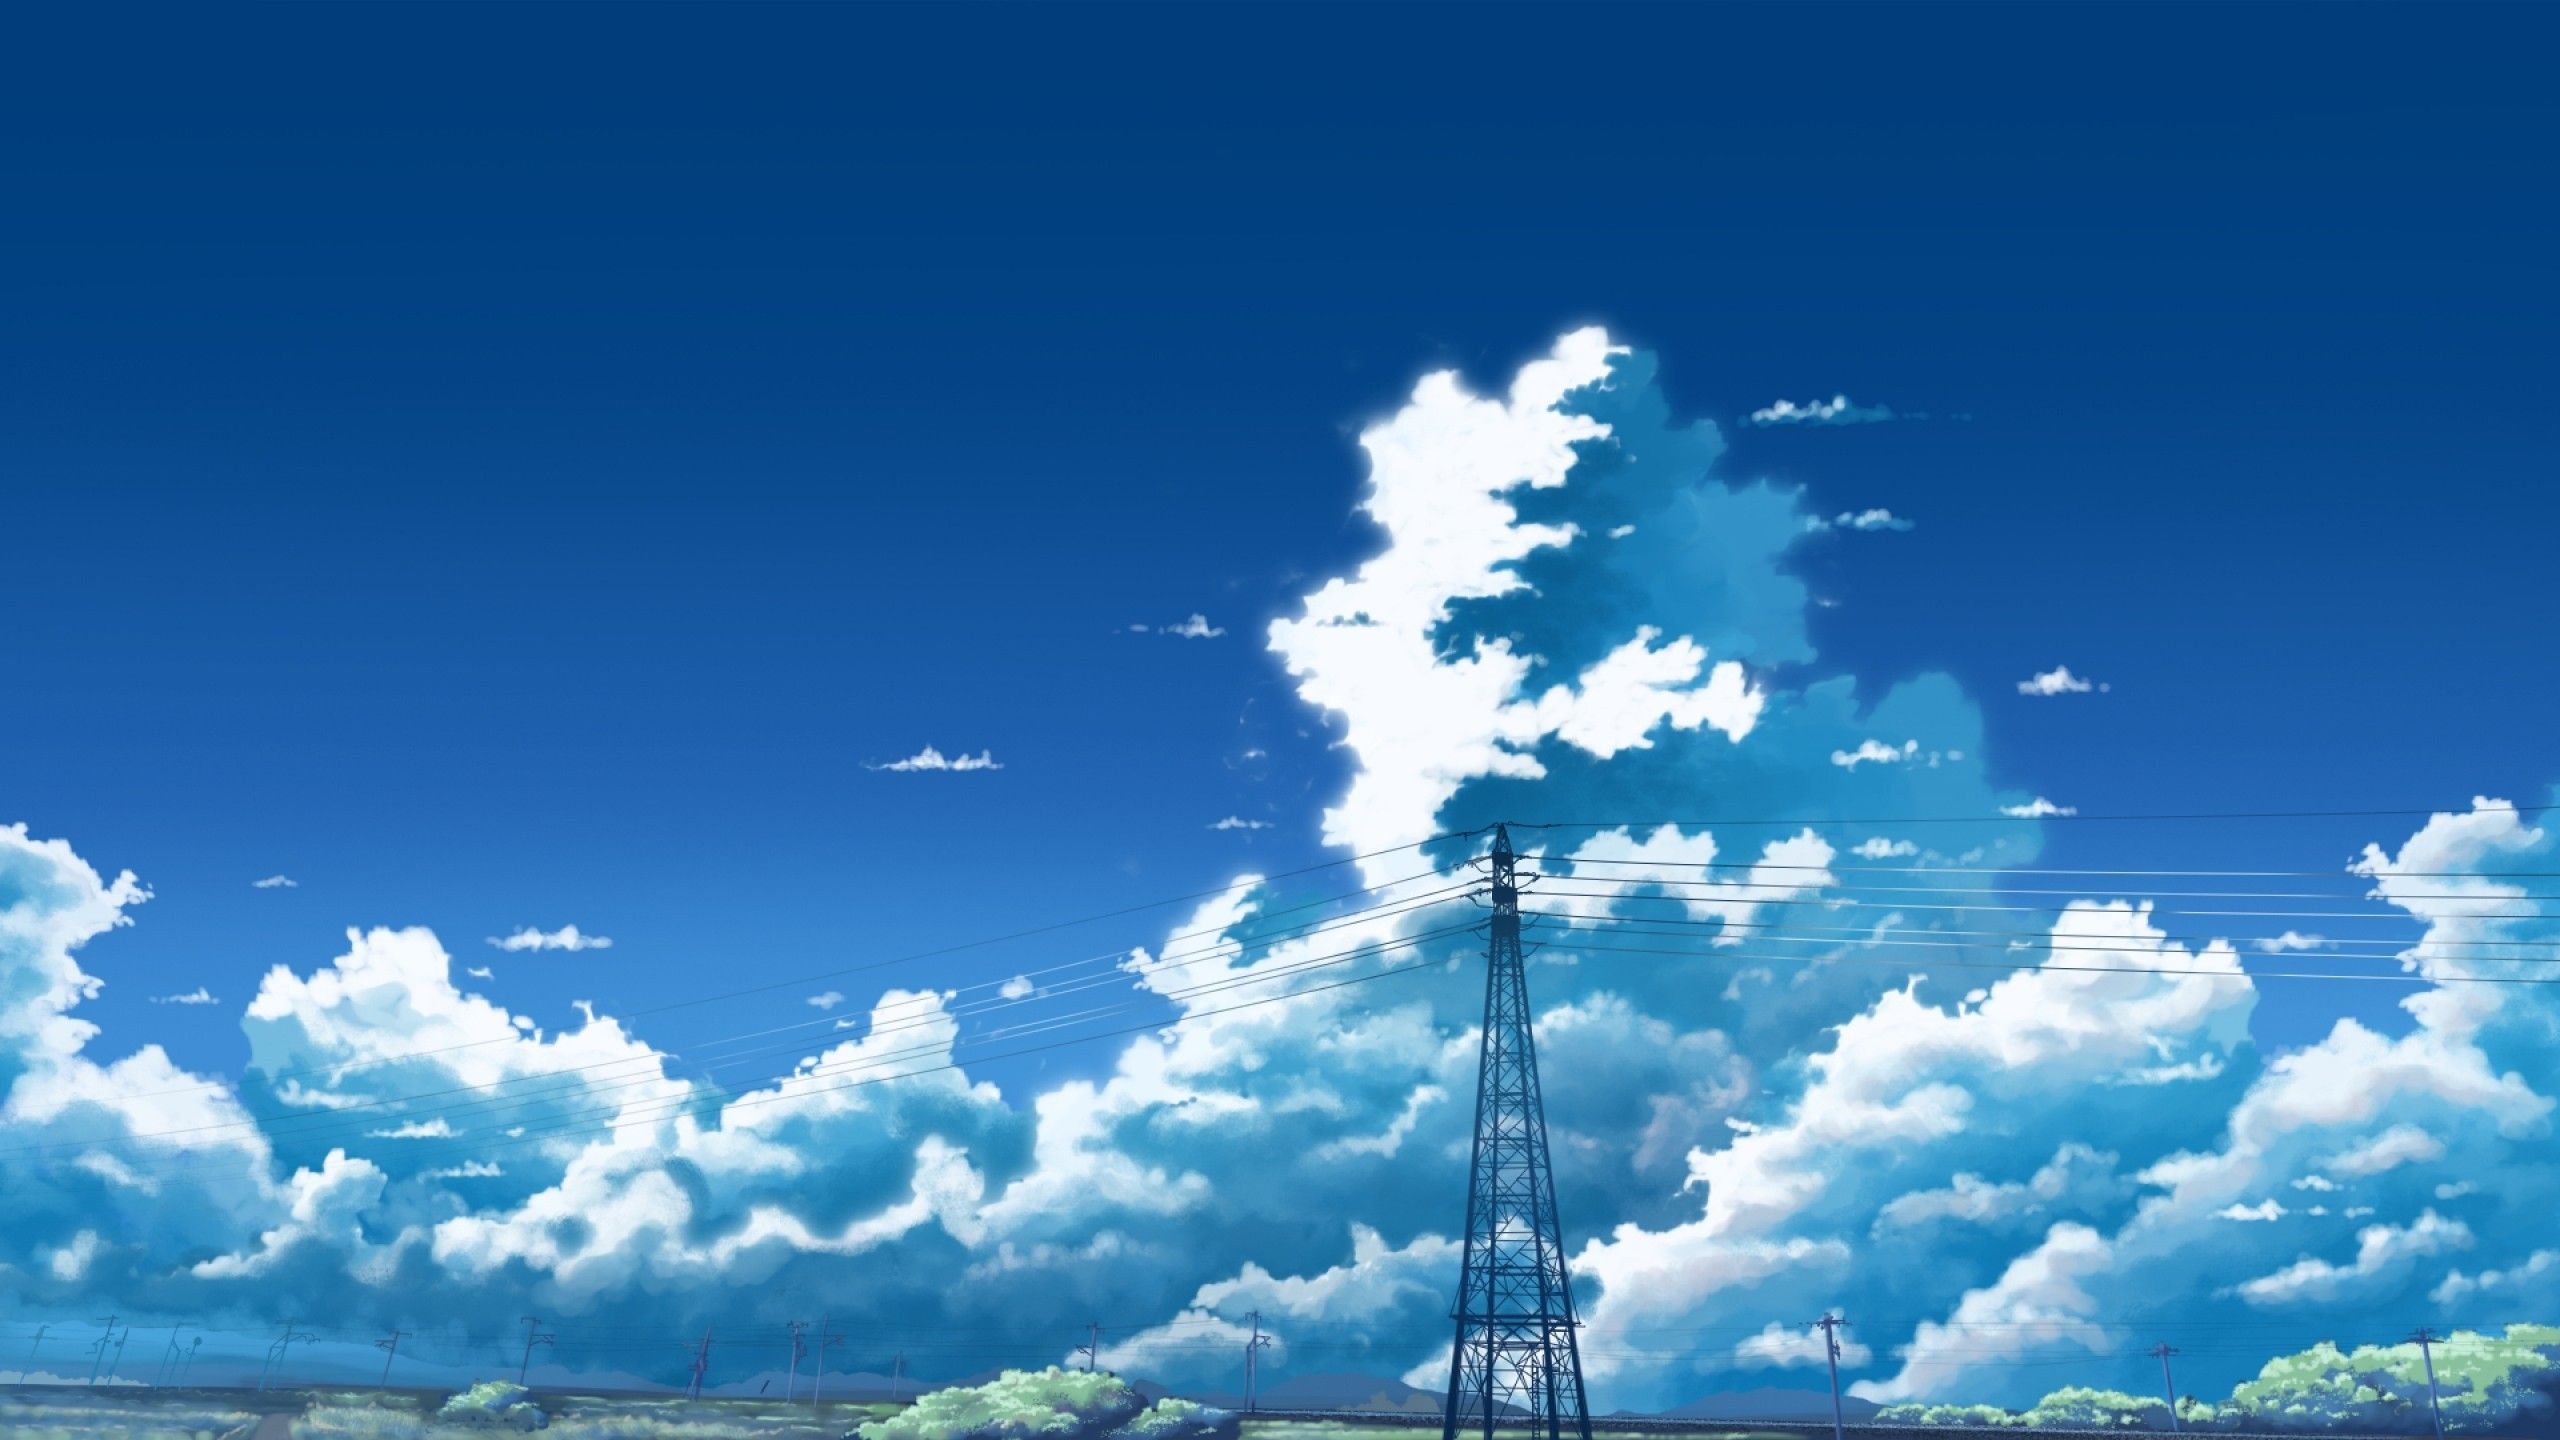 Download 2560x1440 Anime Sky, Anime Landscape, Clouds Wallpaper